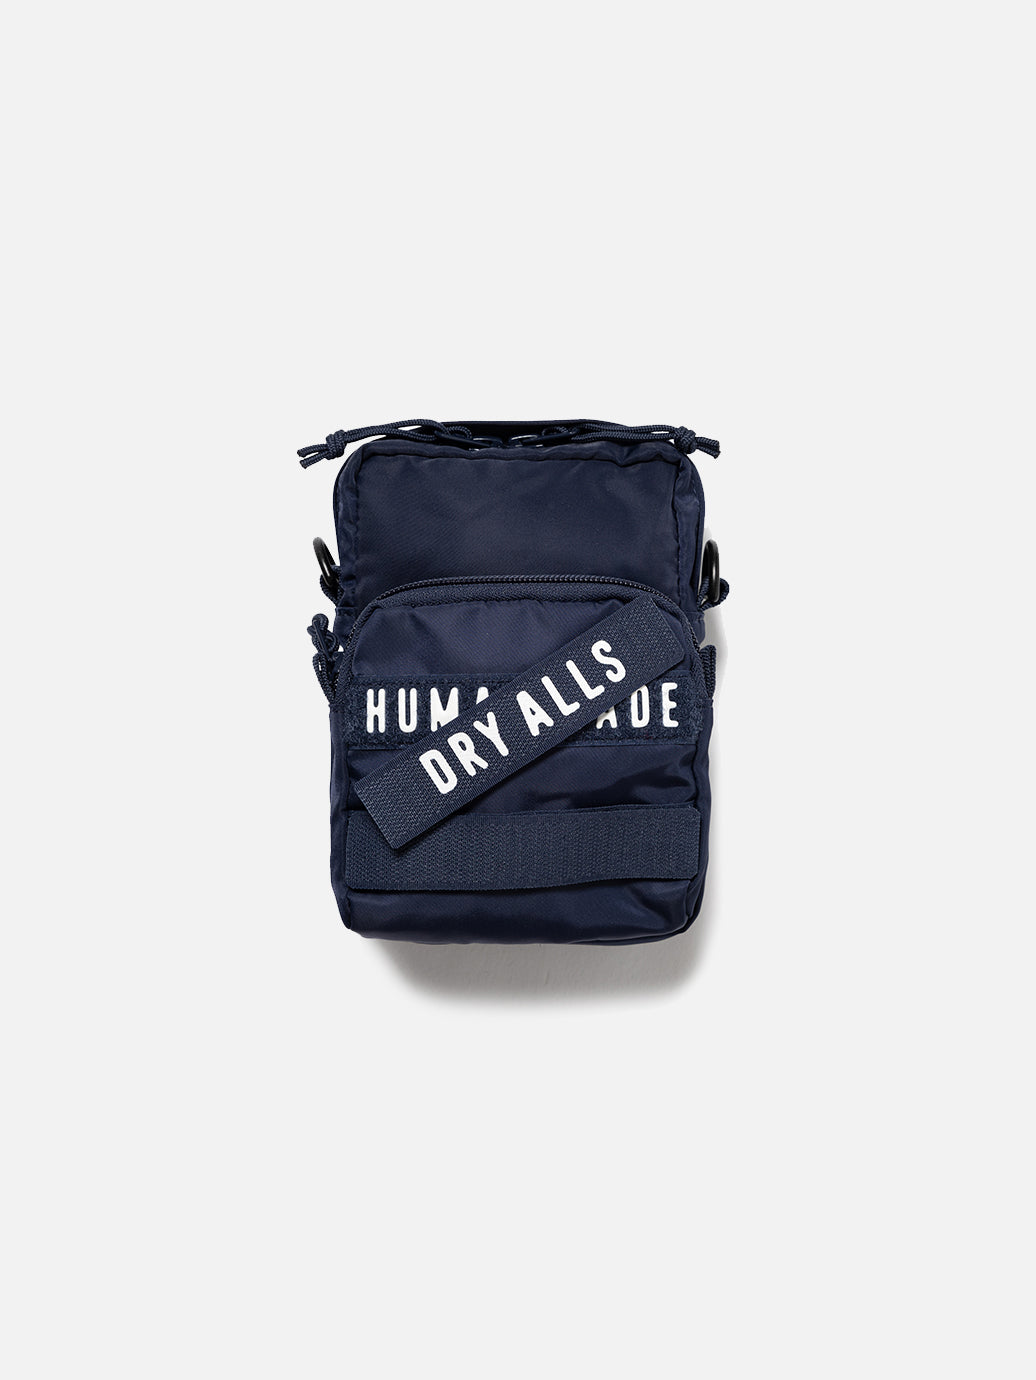 HUMAN MADE MILITARY POUCH NAVY - ショルダーバッグ